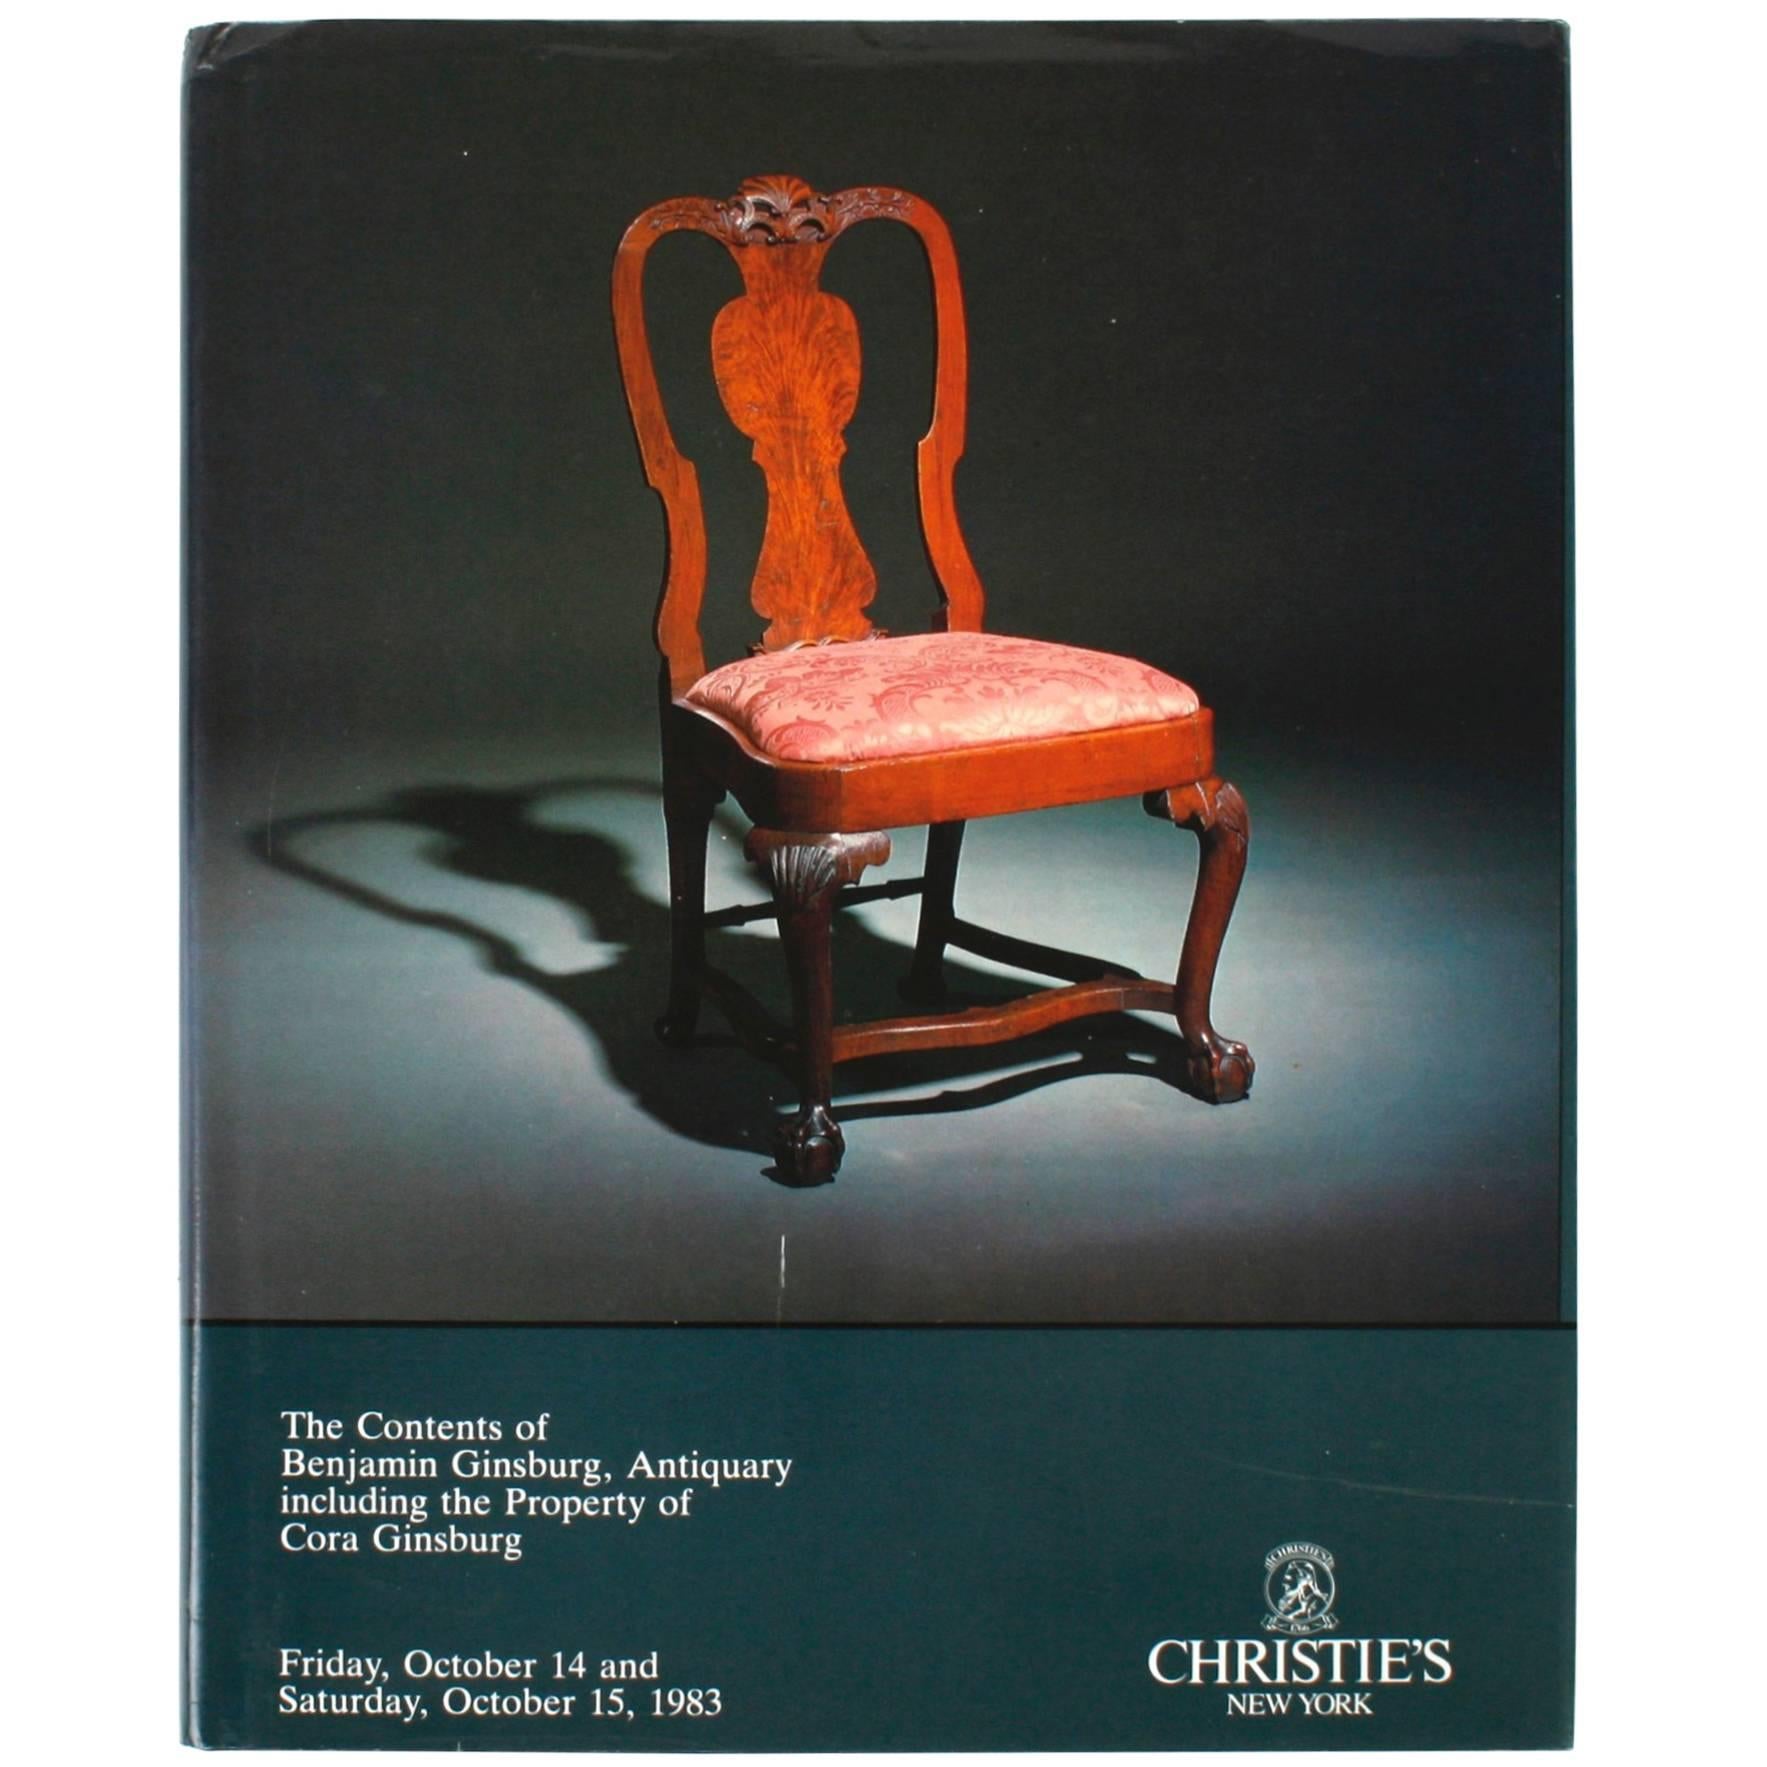 Christie's, Contents of Benjamin Ginsburg Antiquary, October 1983